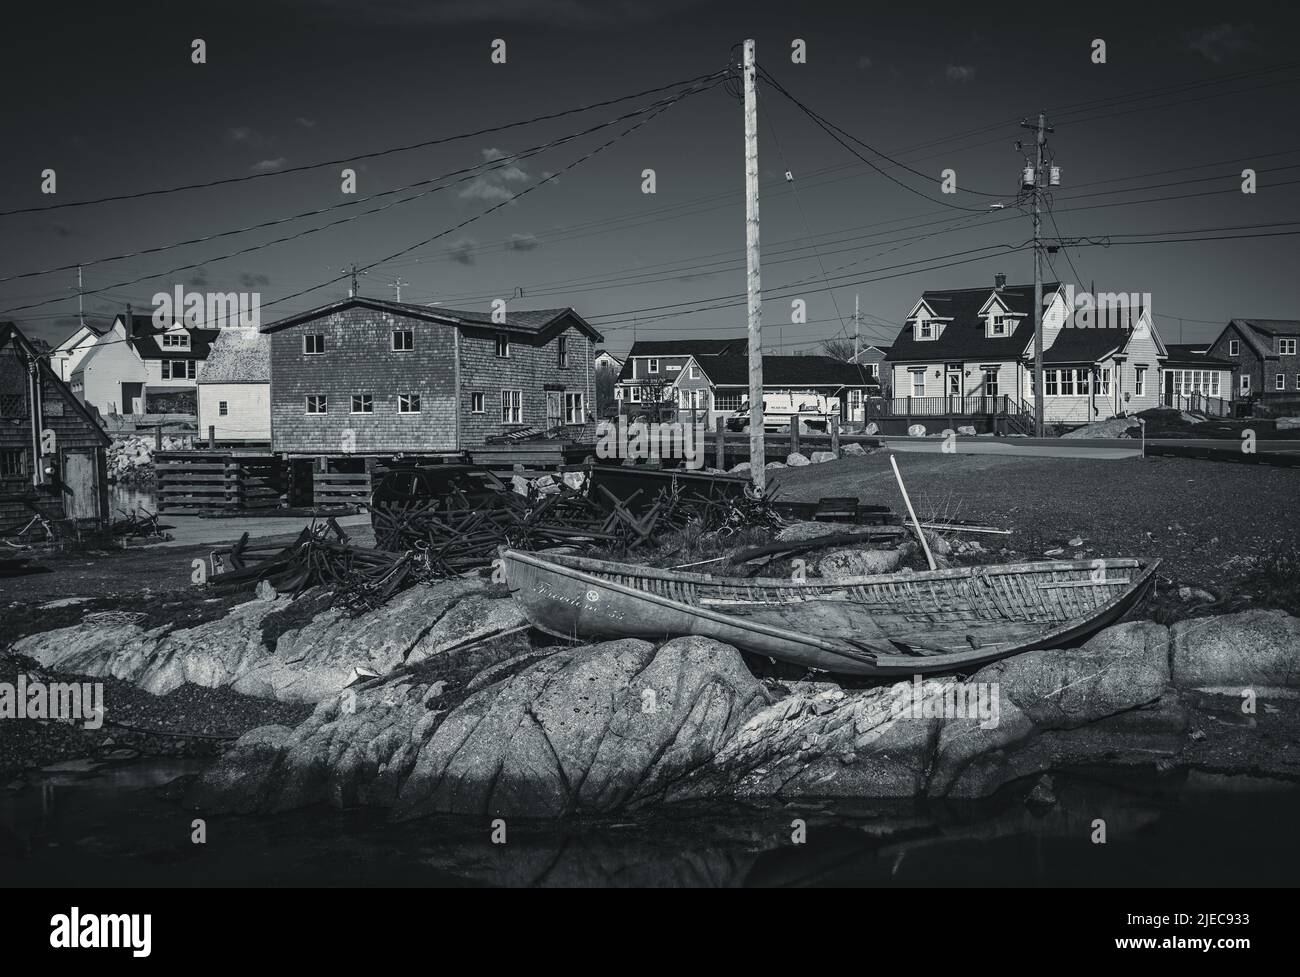 the small fishing village of Peggy's Cove, Nova Scotia, Canada, settled in the early 1800s Stock Photo